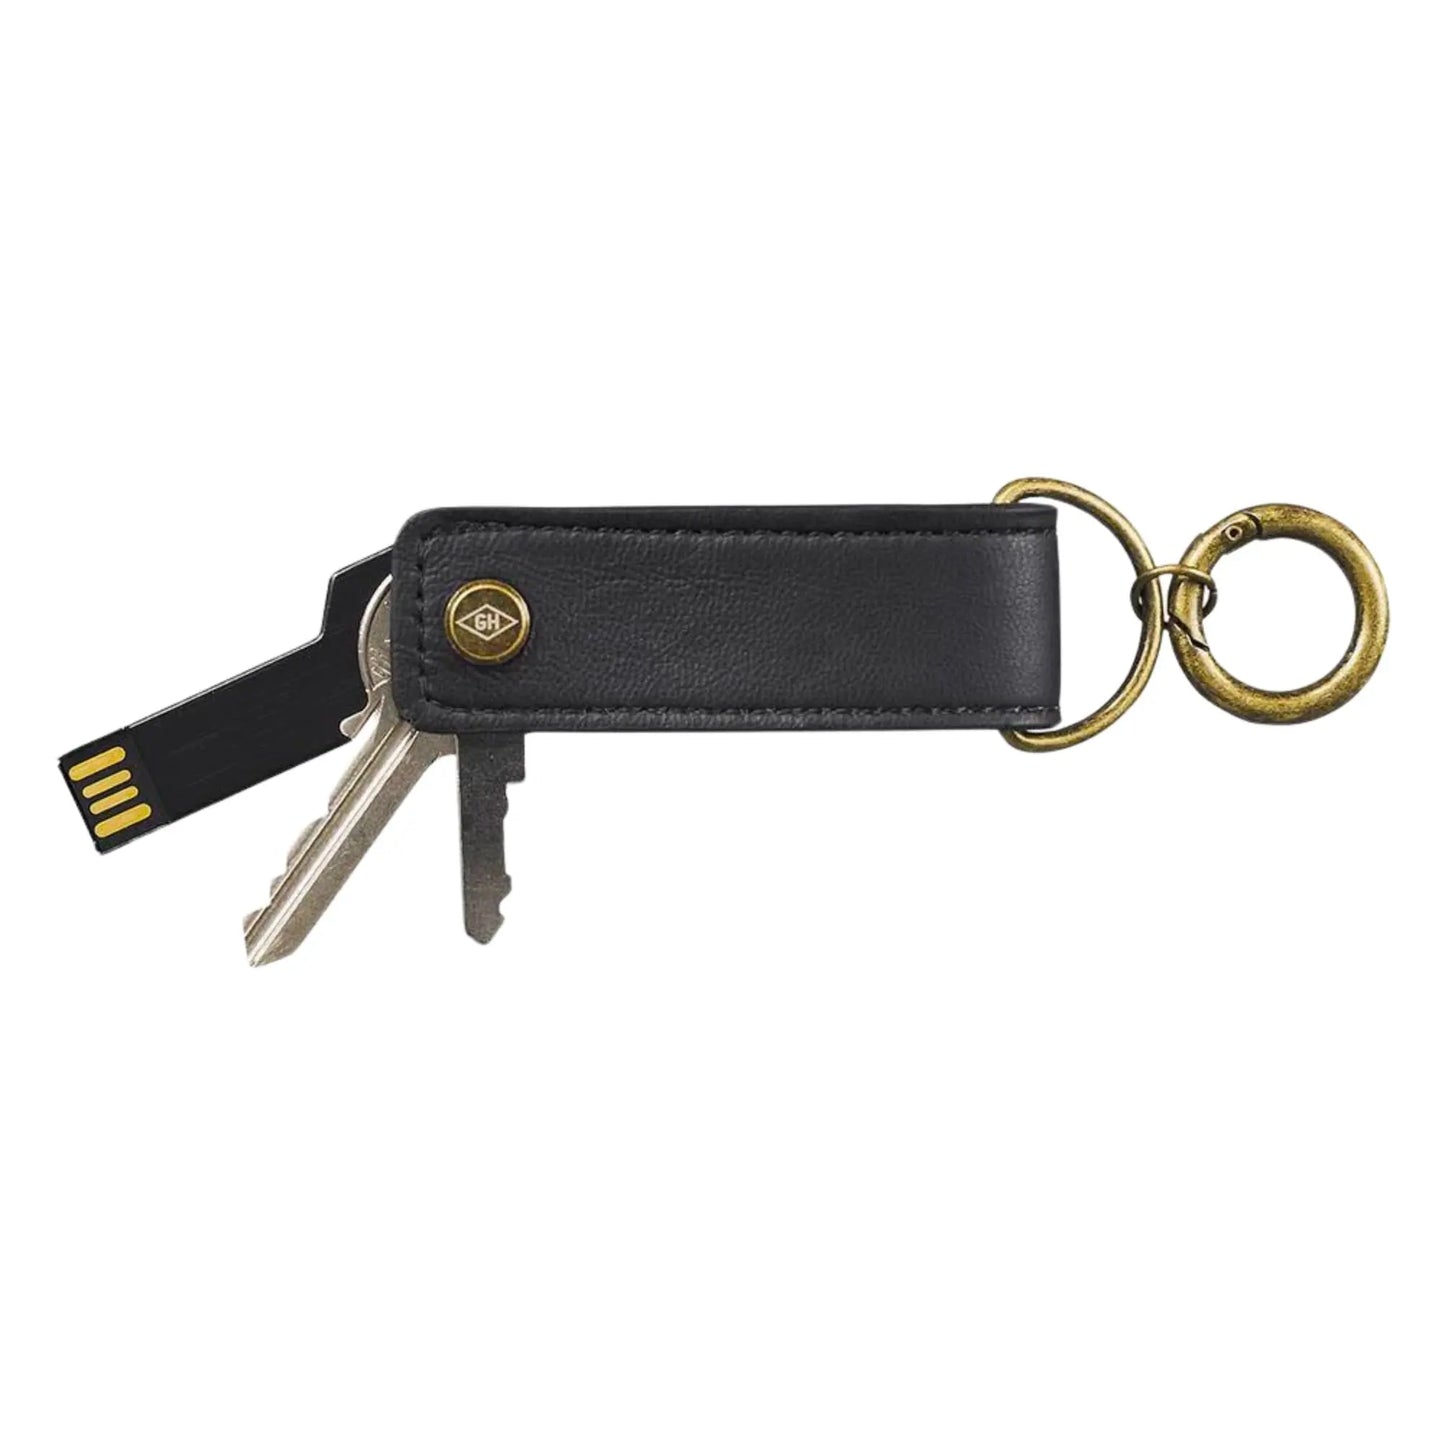 Buy Gentlemen's Hardware Key Tidy with Flash Drive | Keyringss at Woven Durham